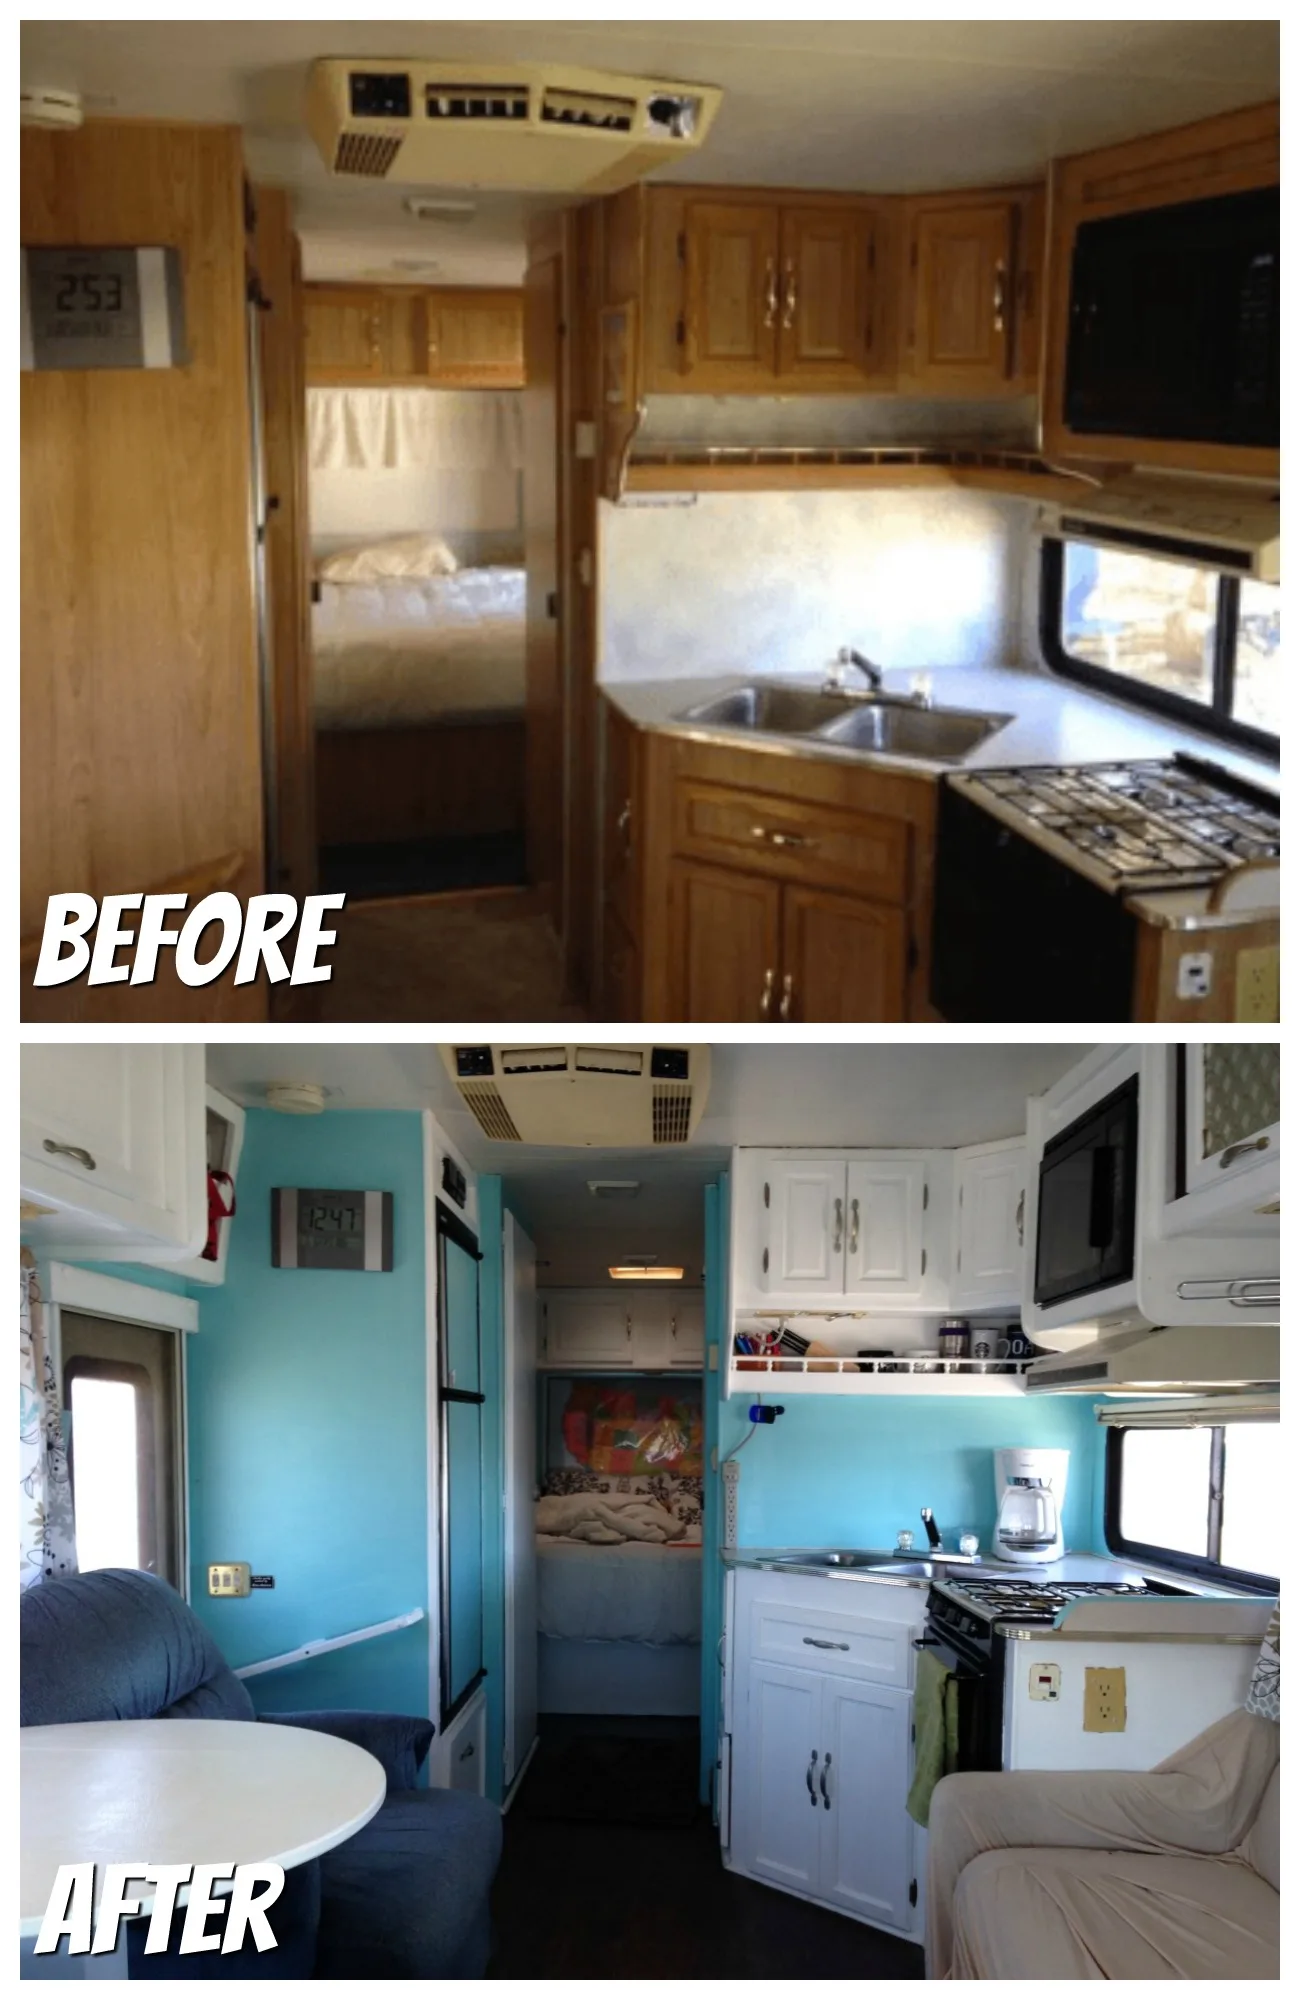 RVObsession.com - RV Renovations | Motorhome Renovations - Heath and Alyssa's first RV was a 1994 Class C Motorhome that they named Franklin. Prior to setting out on a 50 state tour for their honeymoon, they gave Franklin a bit of a facelift.